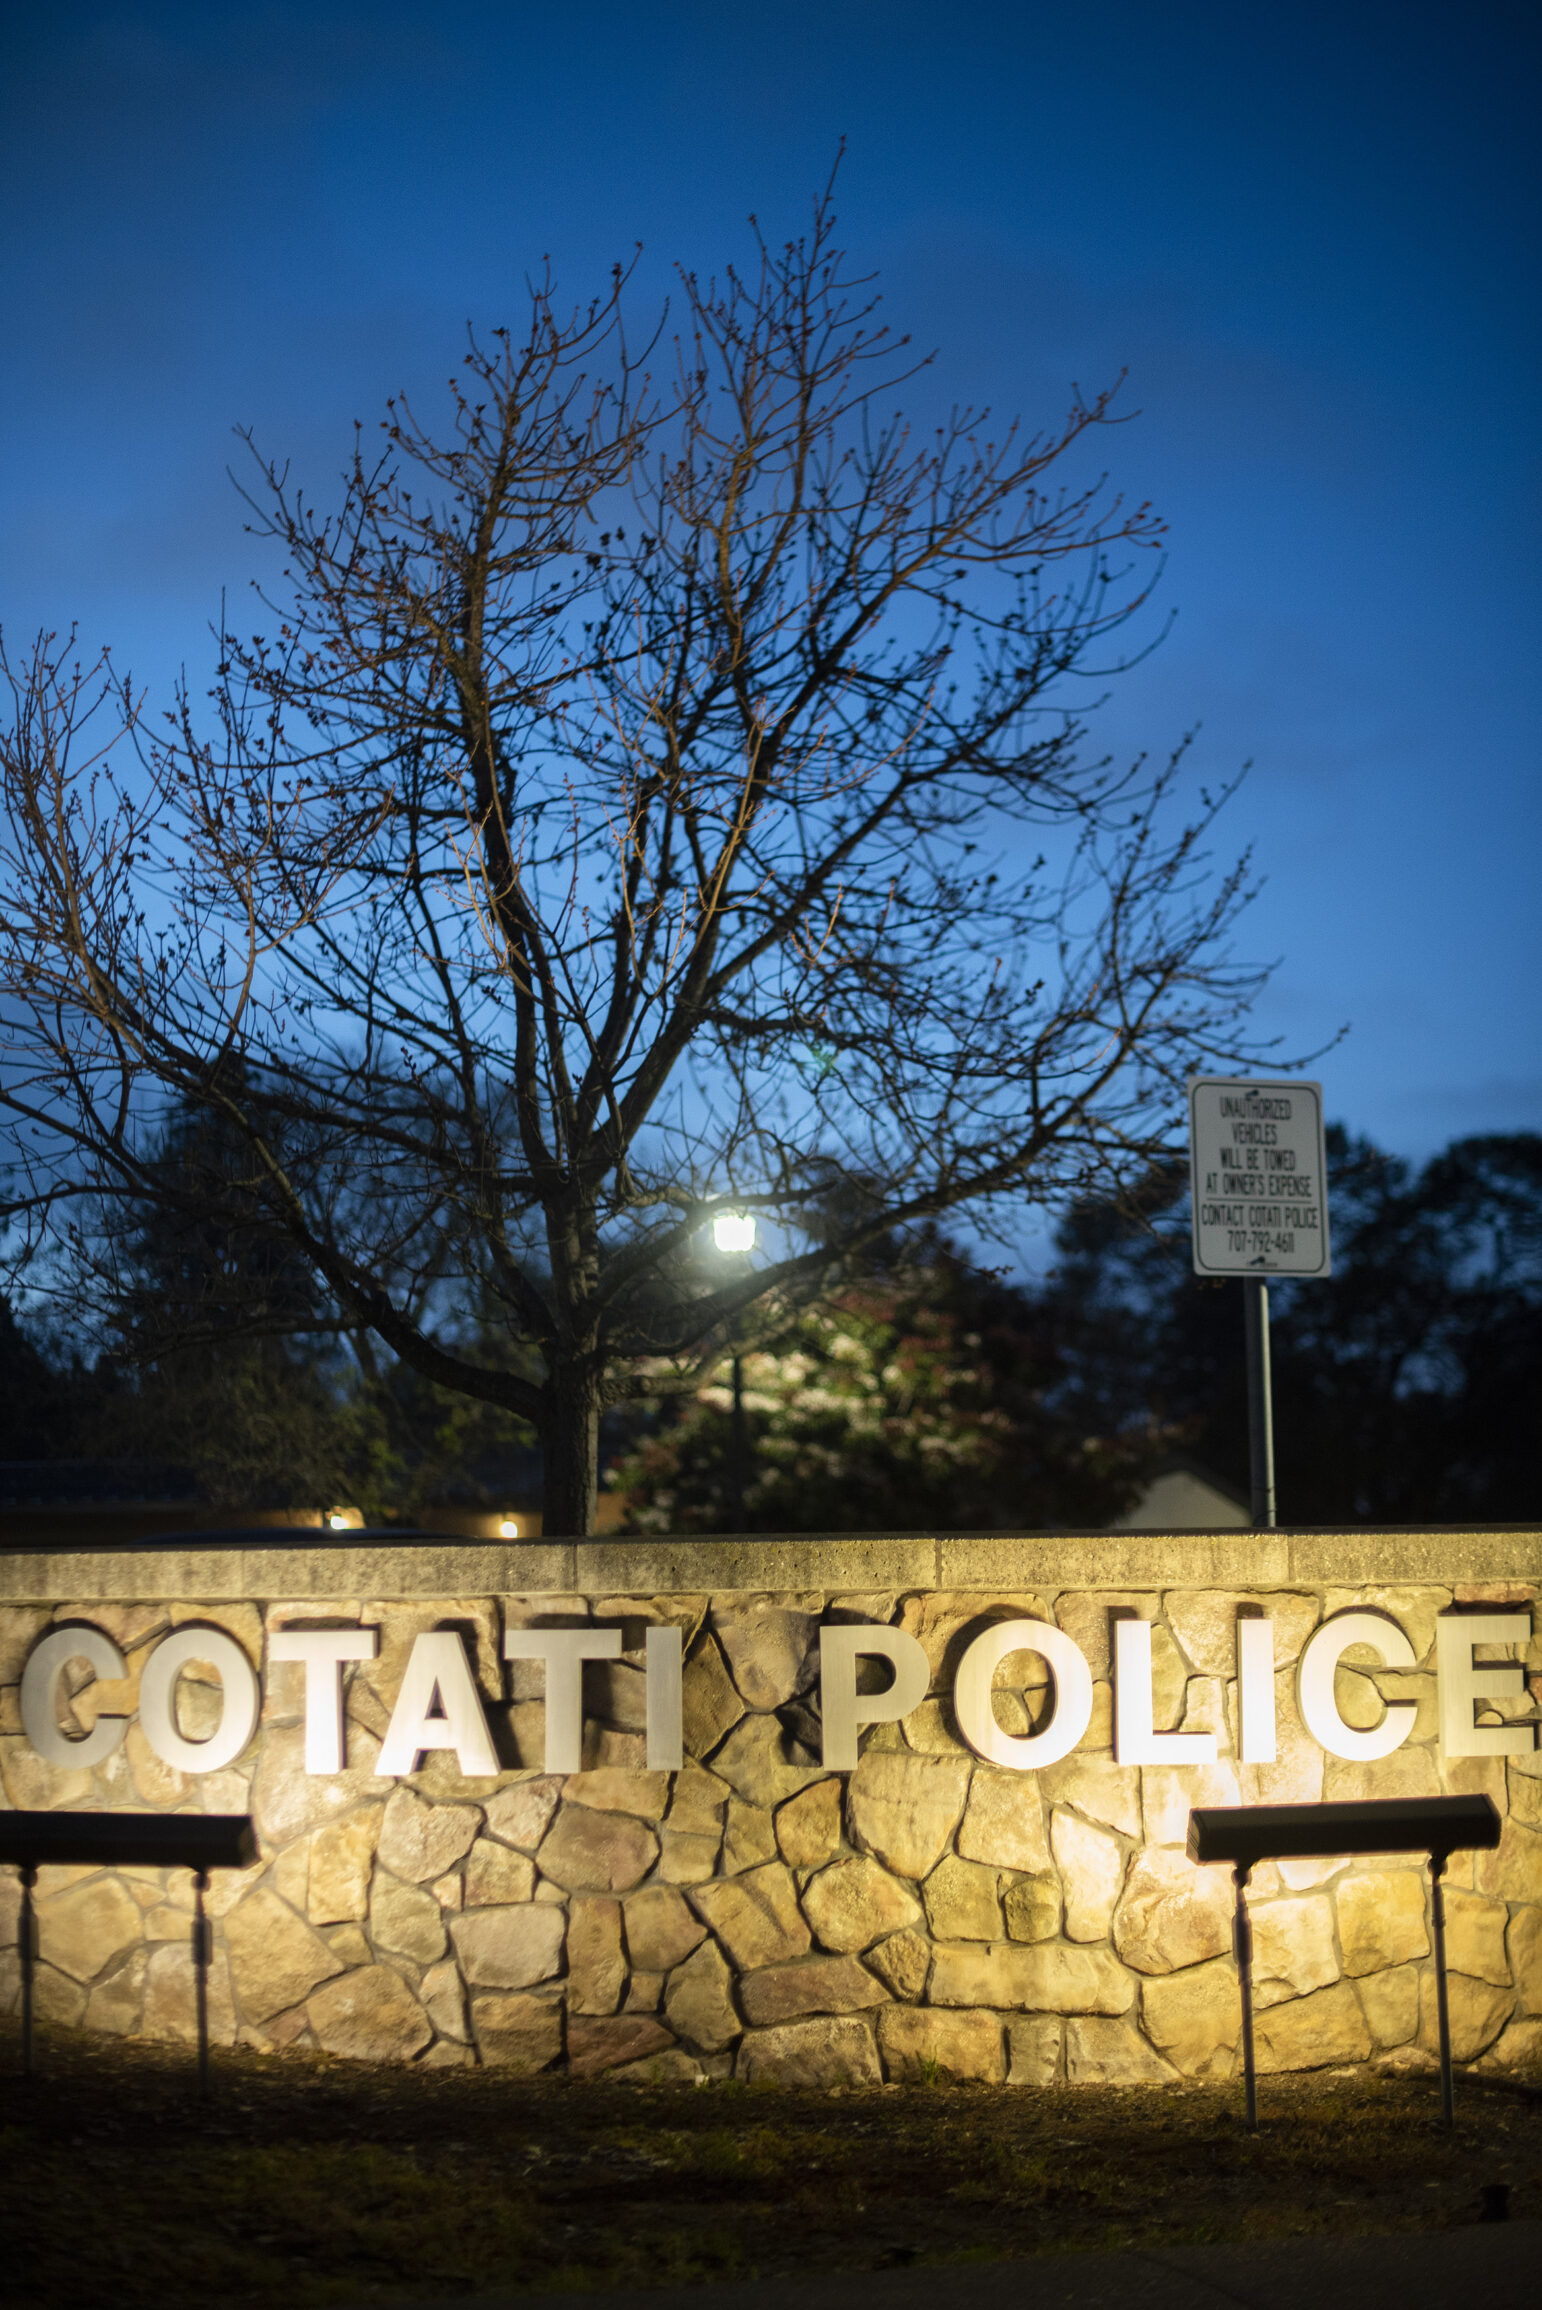 Evening view of a stone sign with raised letters reading "COTATI POLICE" in front of a bare tree. The sign is lit from below, casting shadows on the letters, with a subdued dark blue sky in the background.